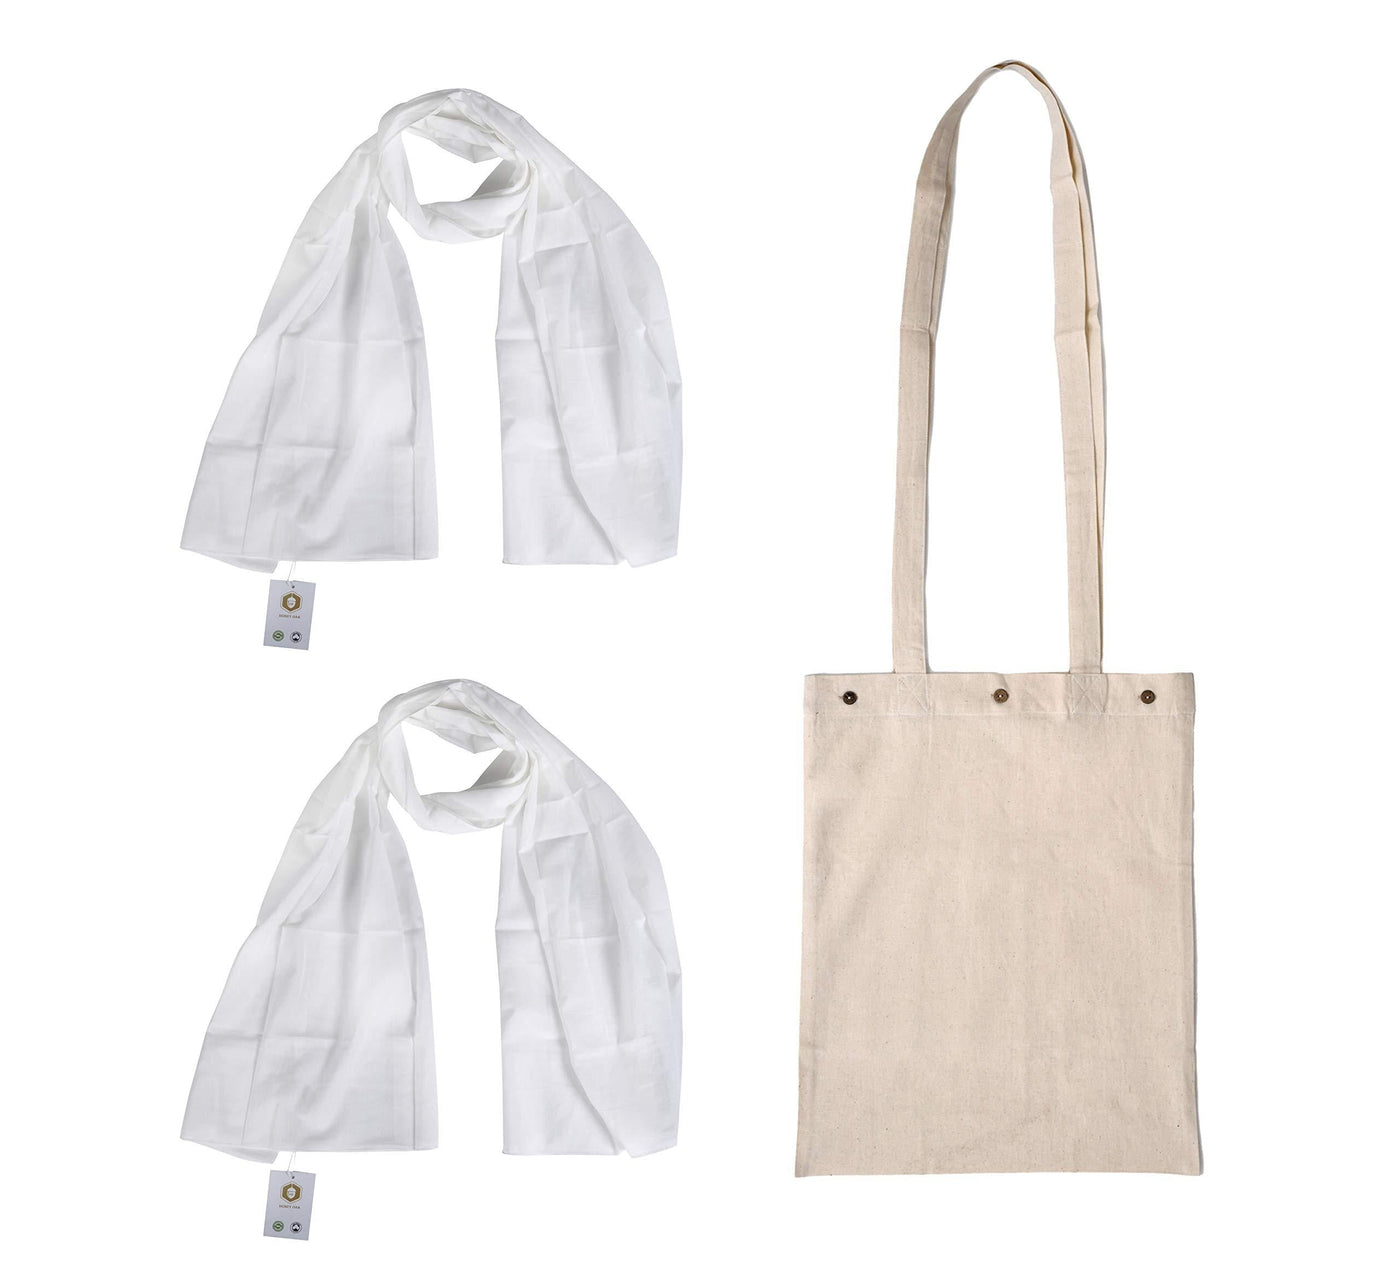 Things to Tie Dye⎜Plain Tote Bag & Scarves for Dyeing ⎜Items to